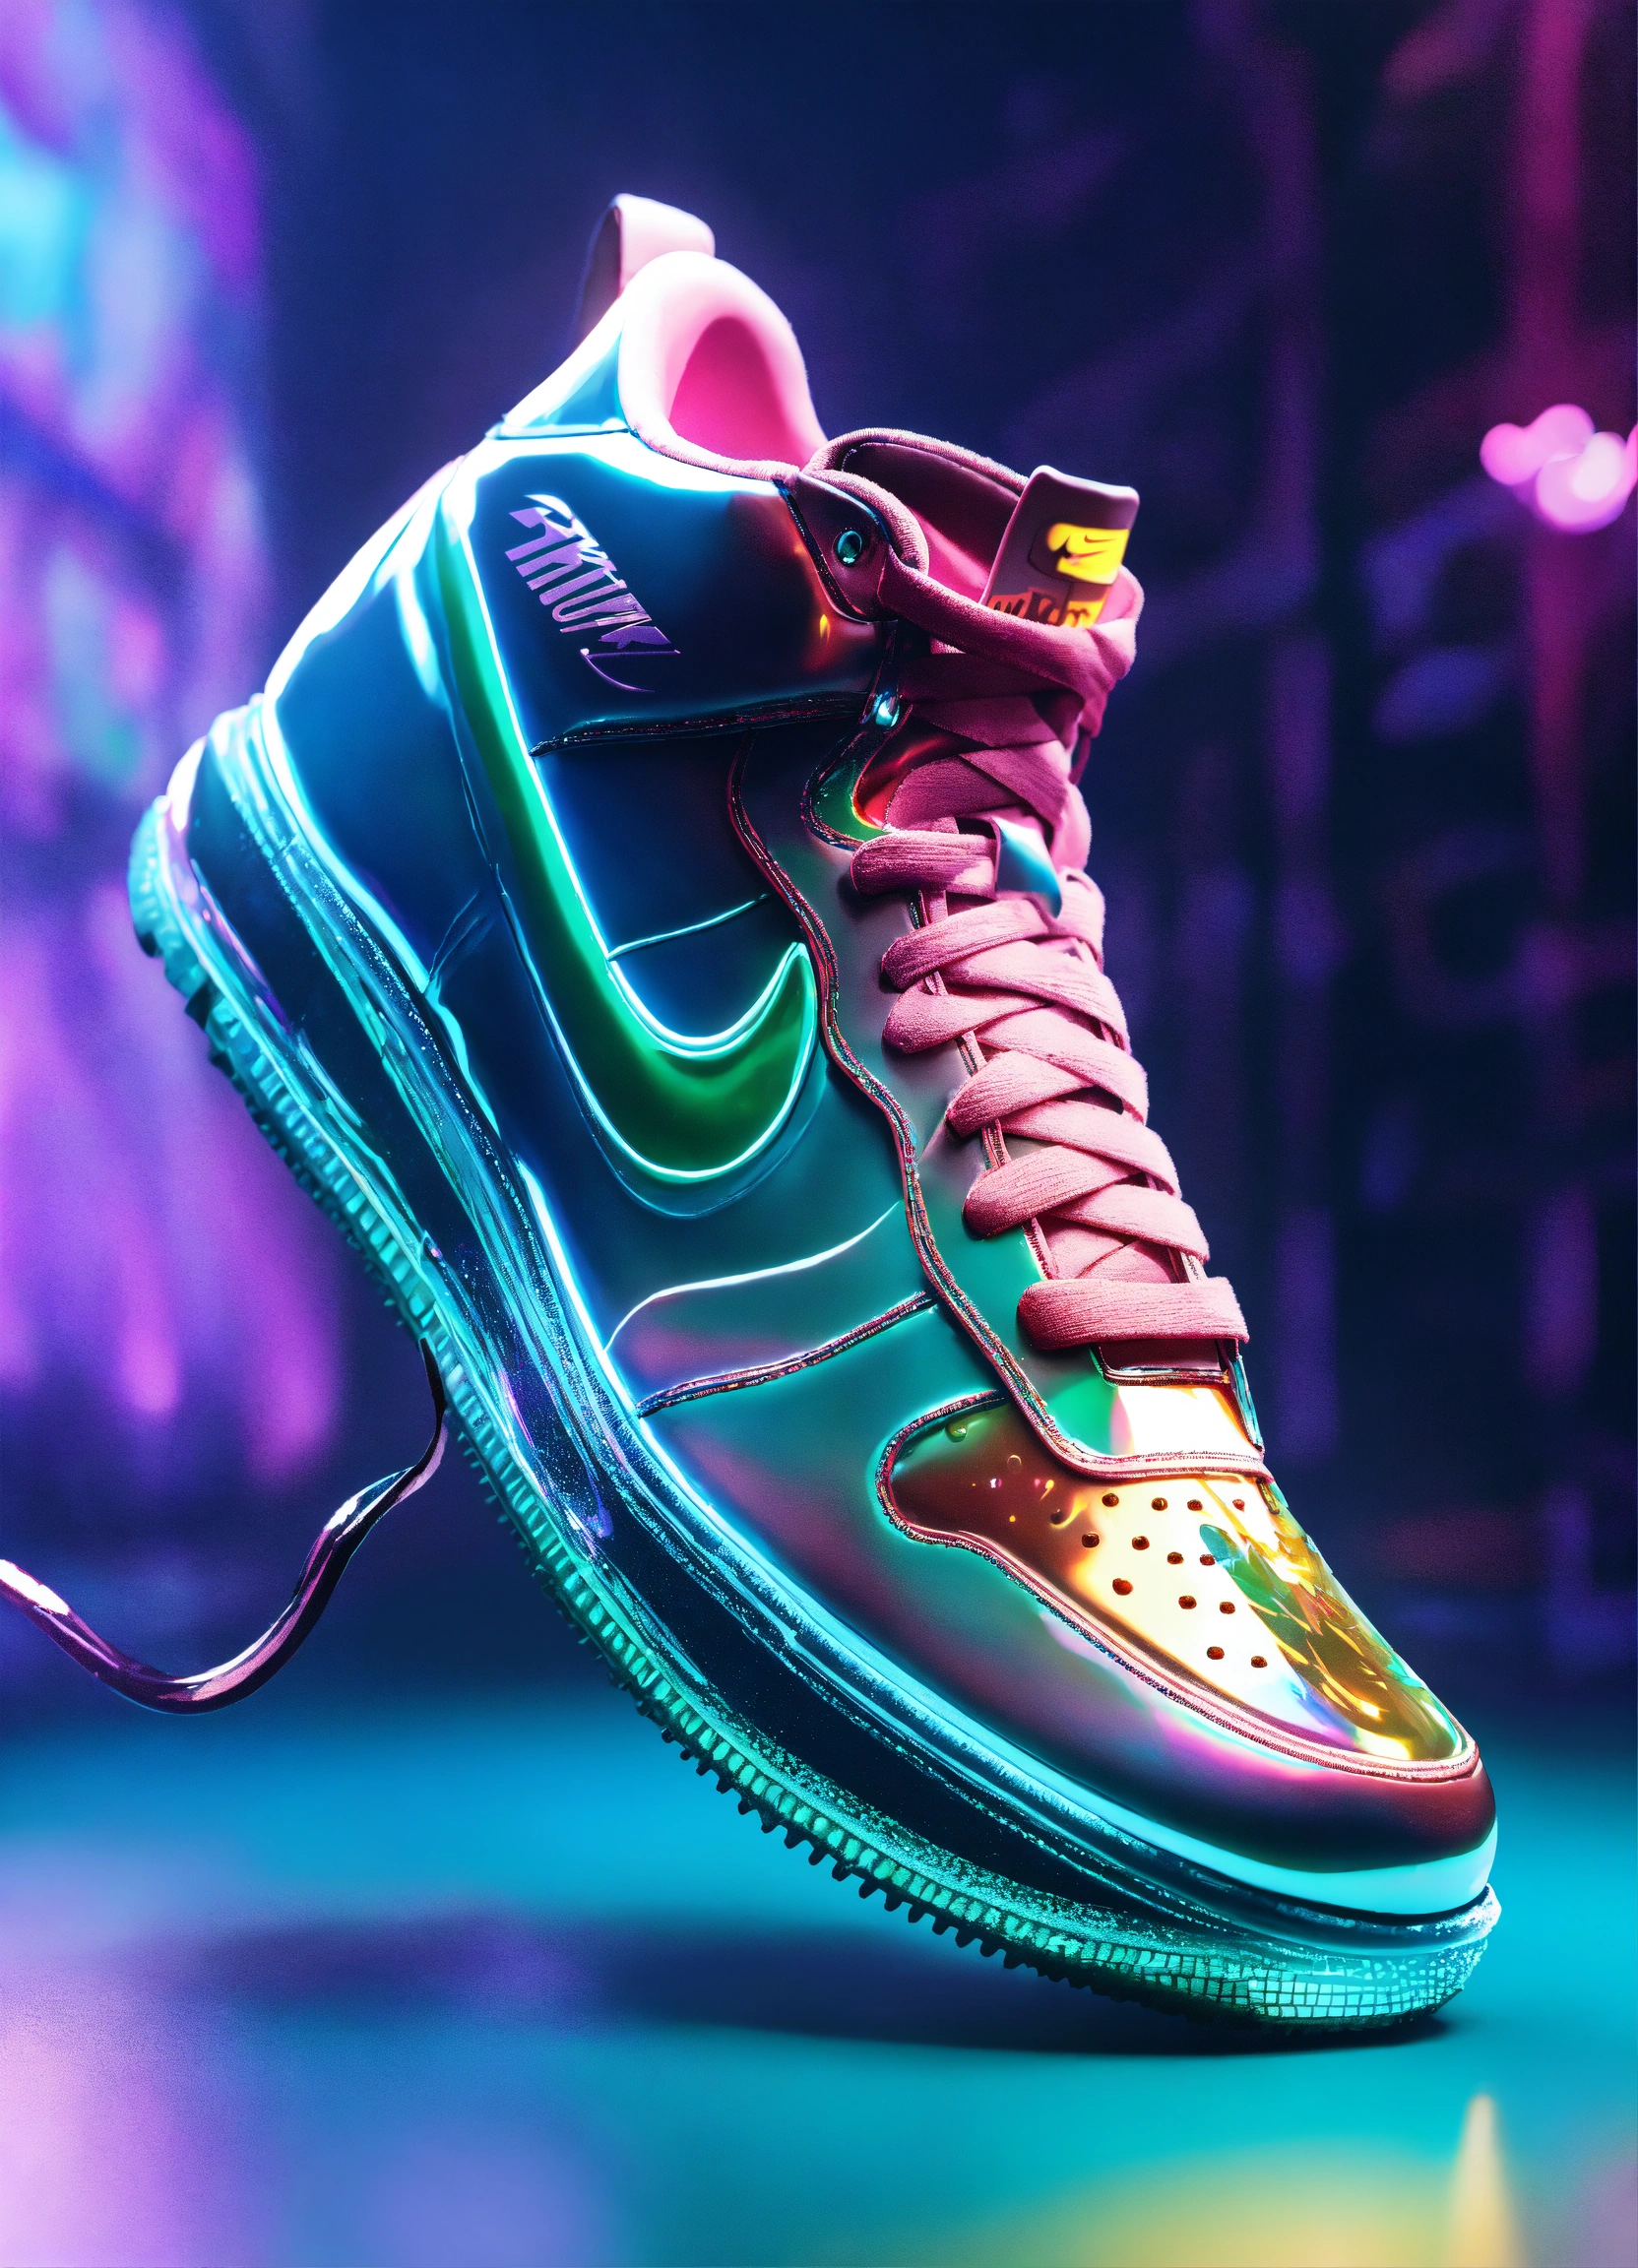 Lexica - Surreal Nike sneakers made out (iridescent glass), PCB, hyper ...